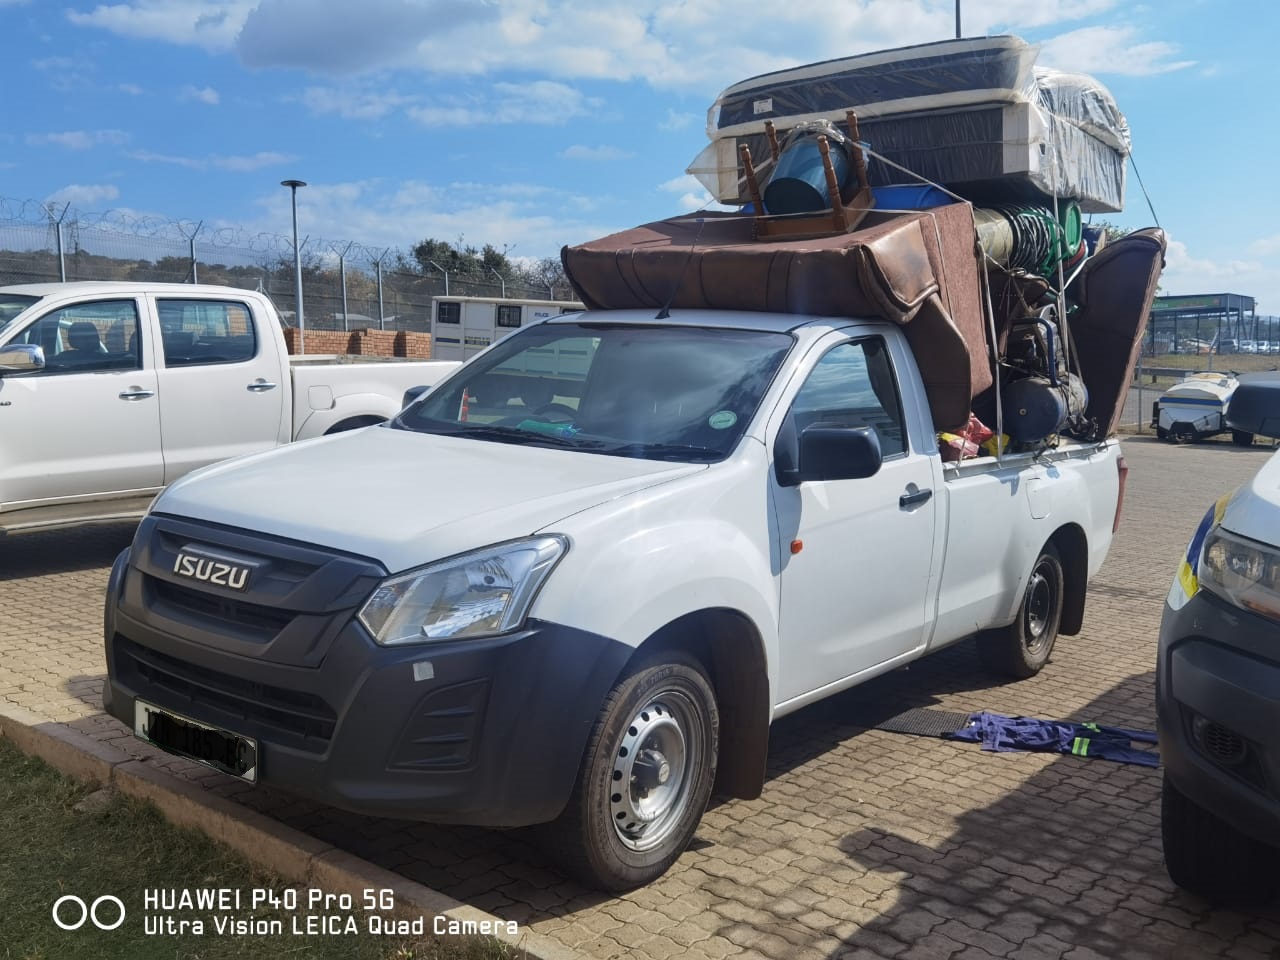 Stolen vehicle intercepted at Lebombo Port of Entry, suspect arrested